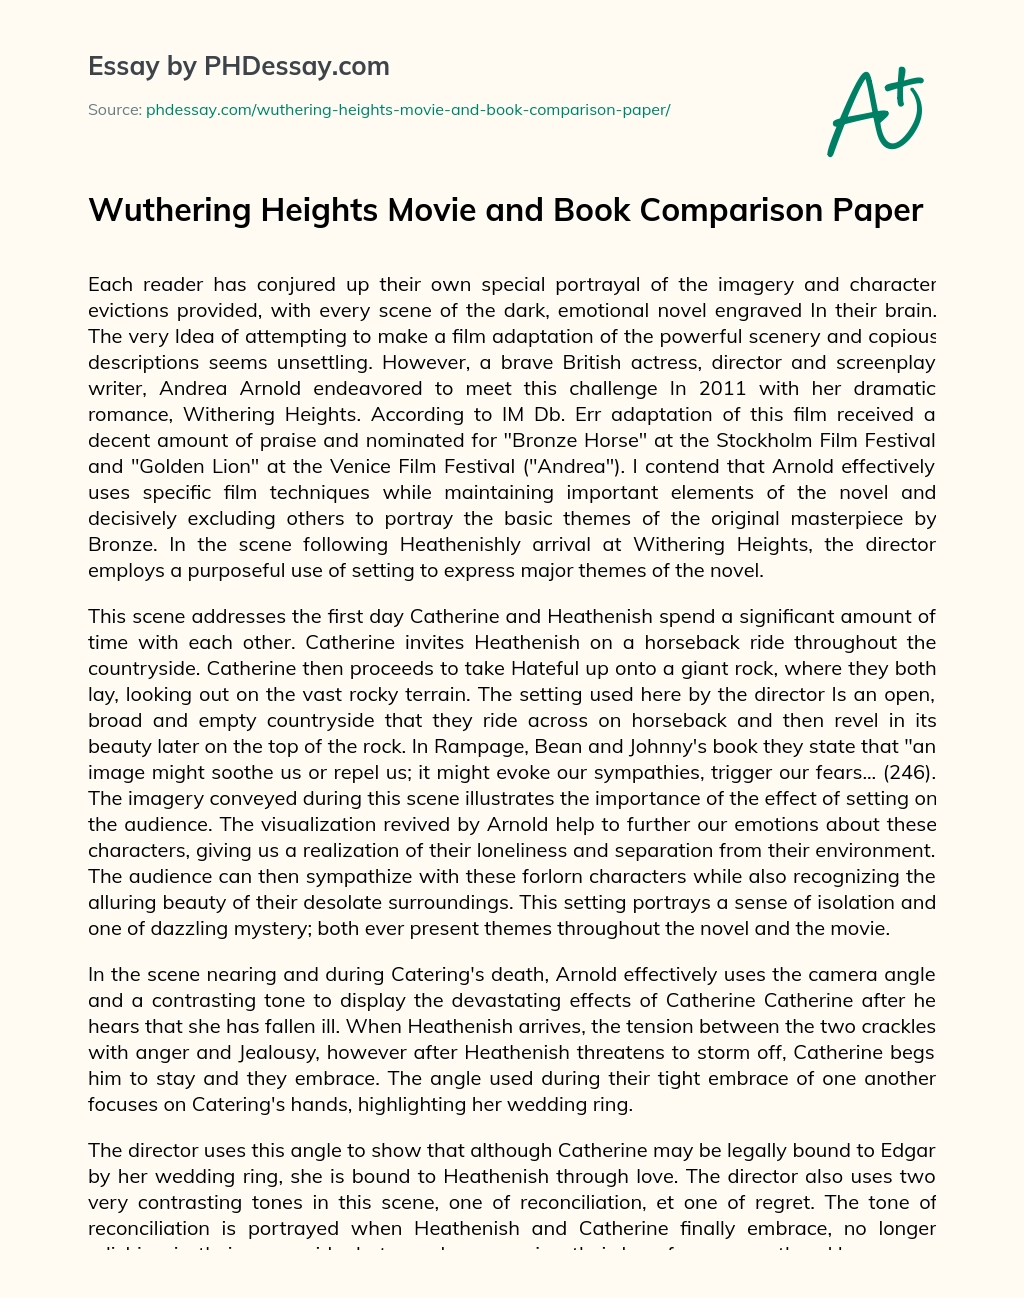 Реферат: Wuthering Heights Essay Research Paper Settings and